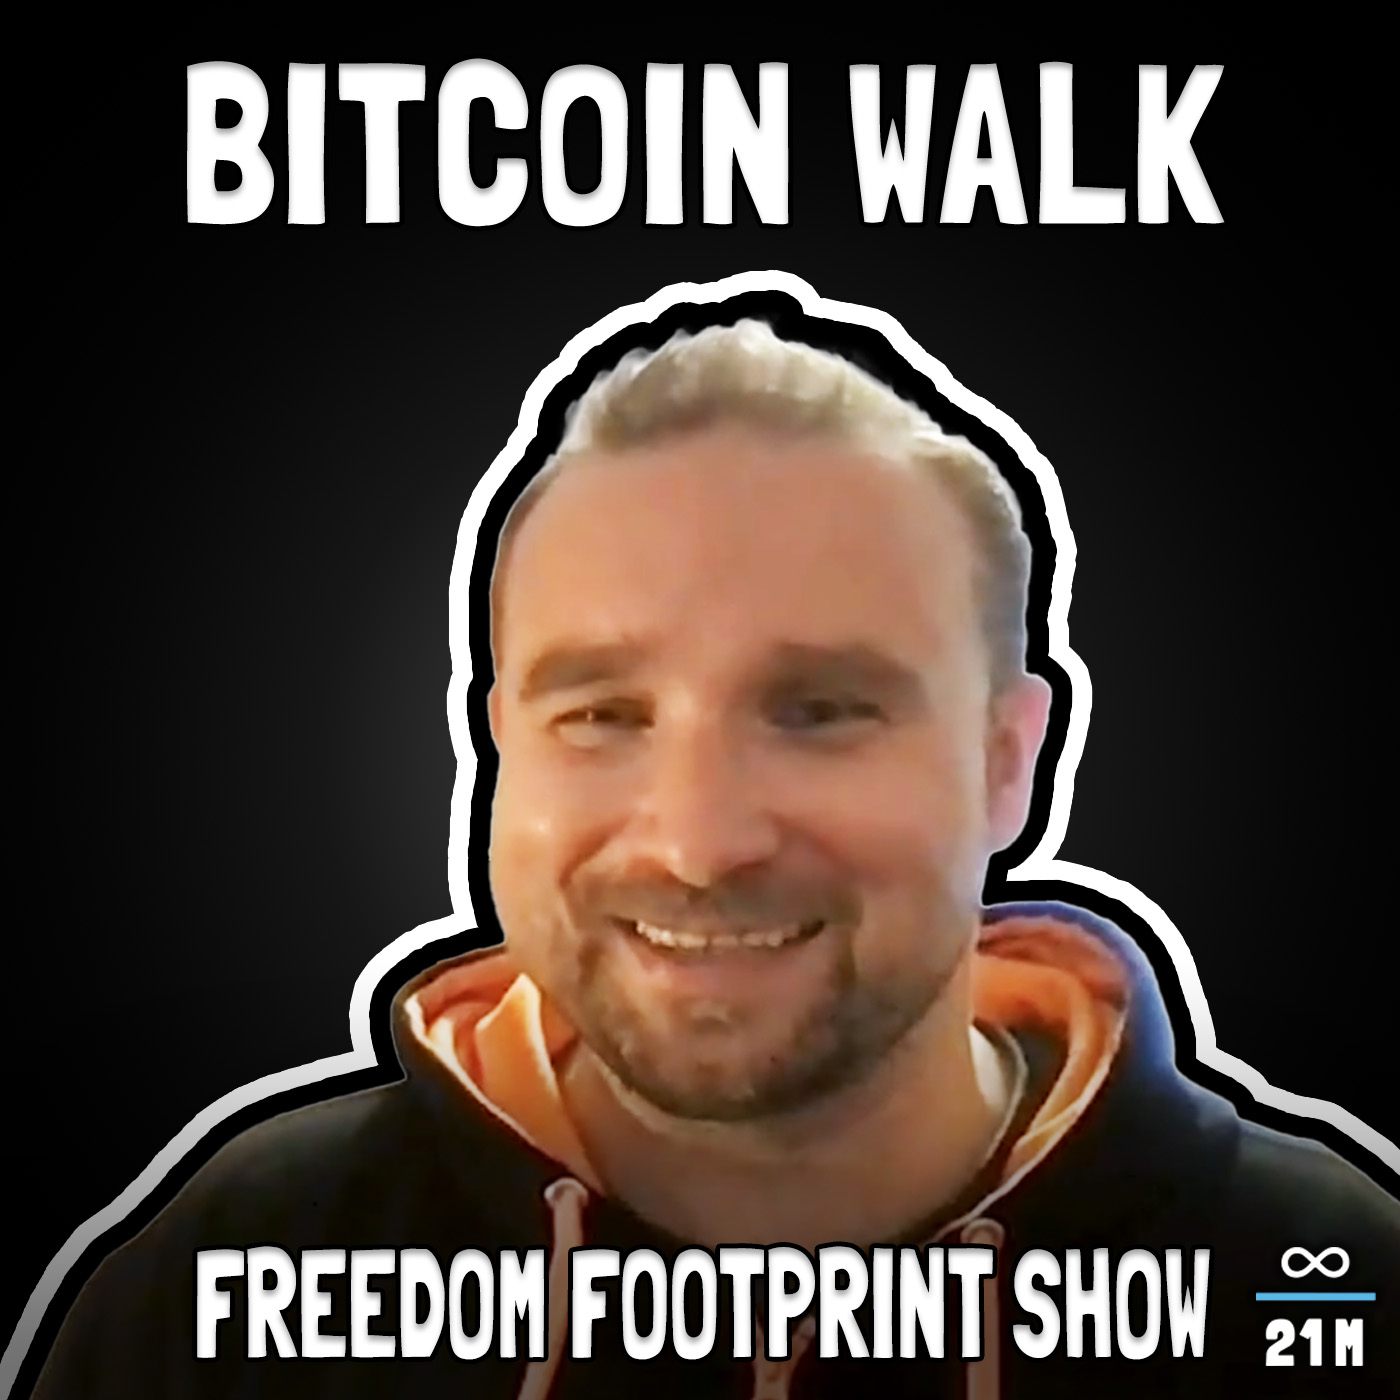 Walking with Bitcoiners with Jacob from Bitcoin Walk - FFS #112